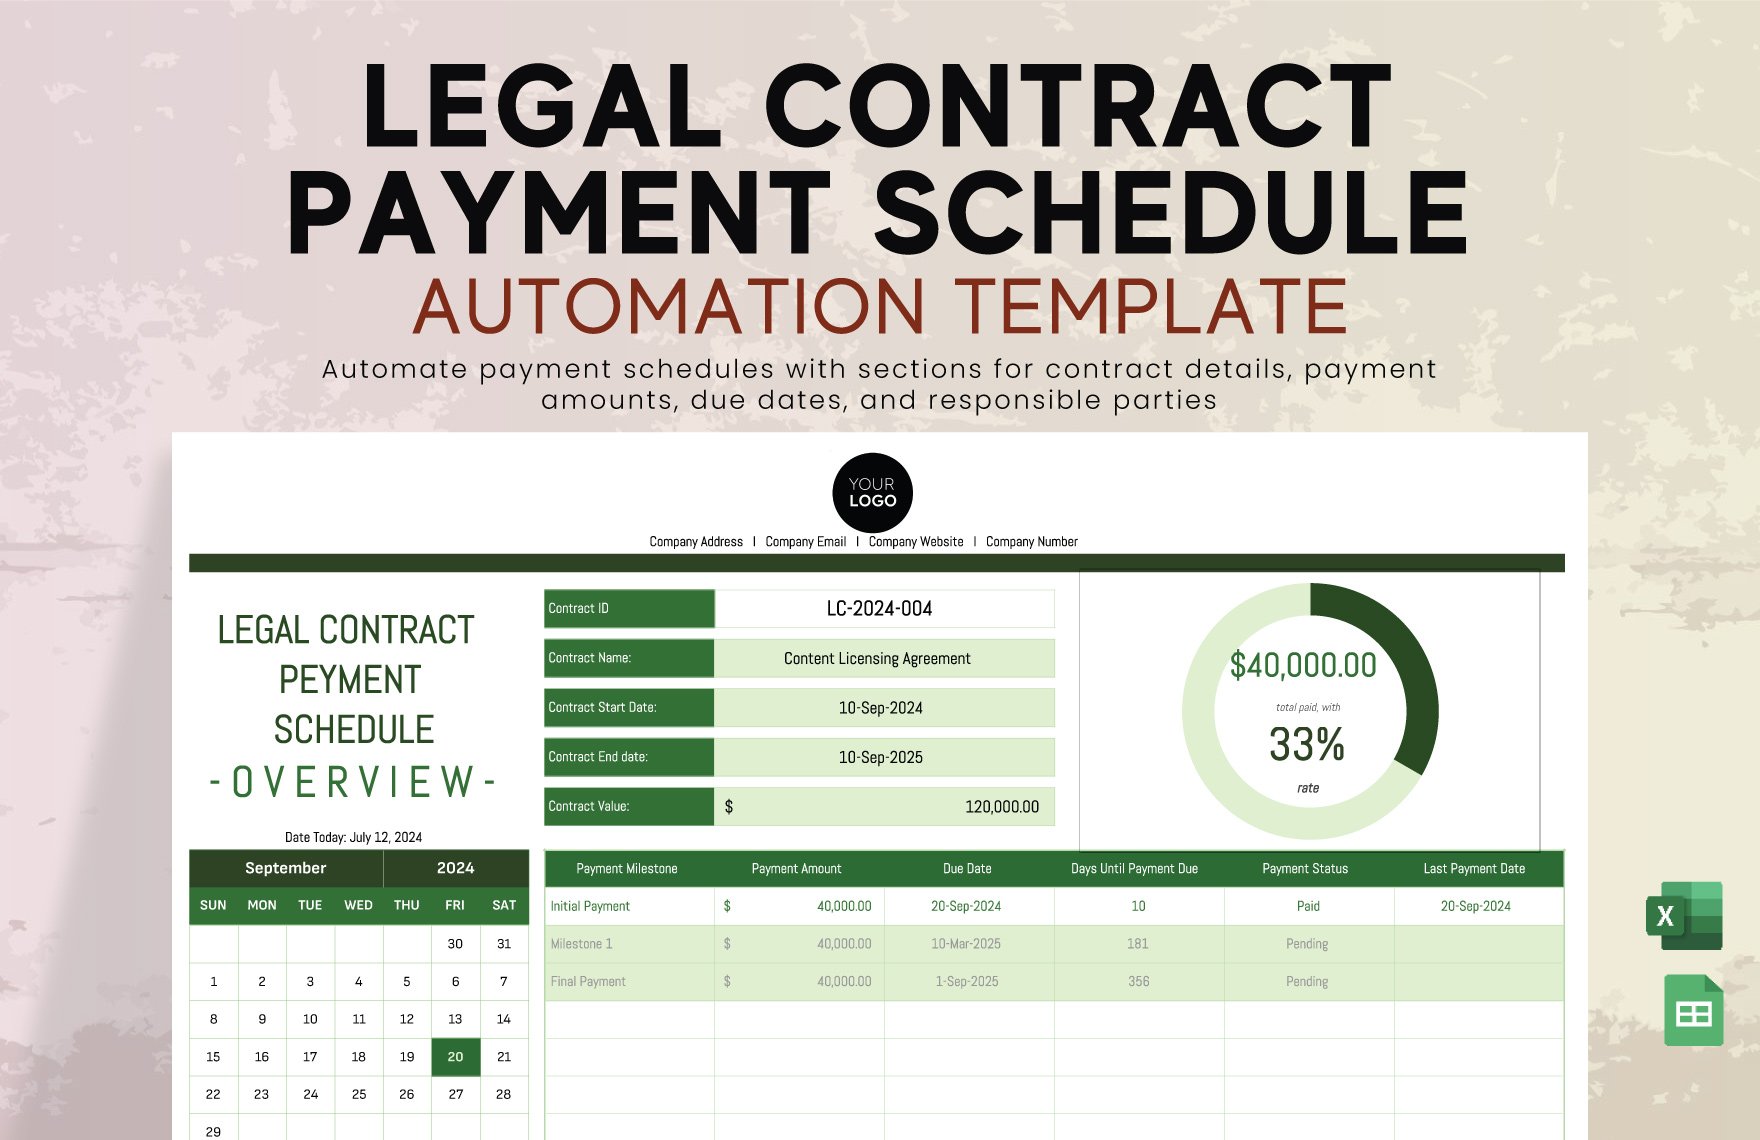 Legal Contract Payment Schedule Automation Template in Excel, Google Sheets